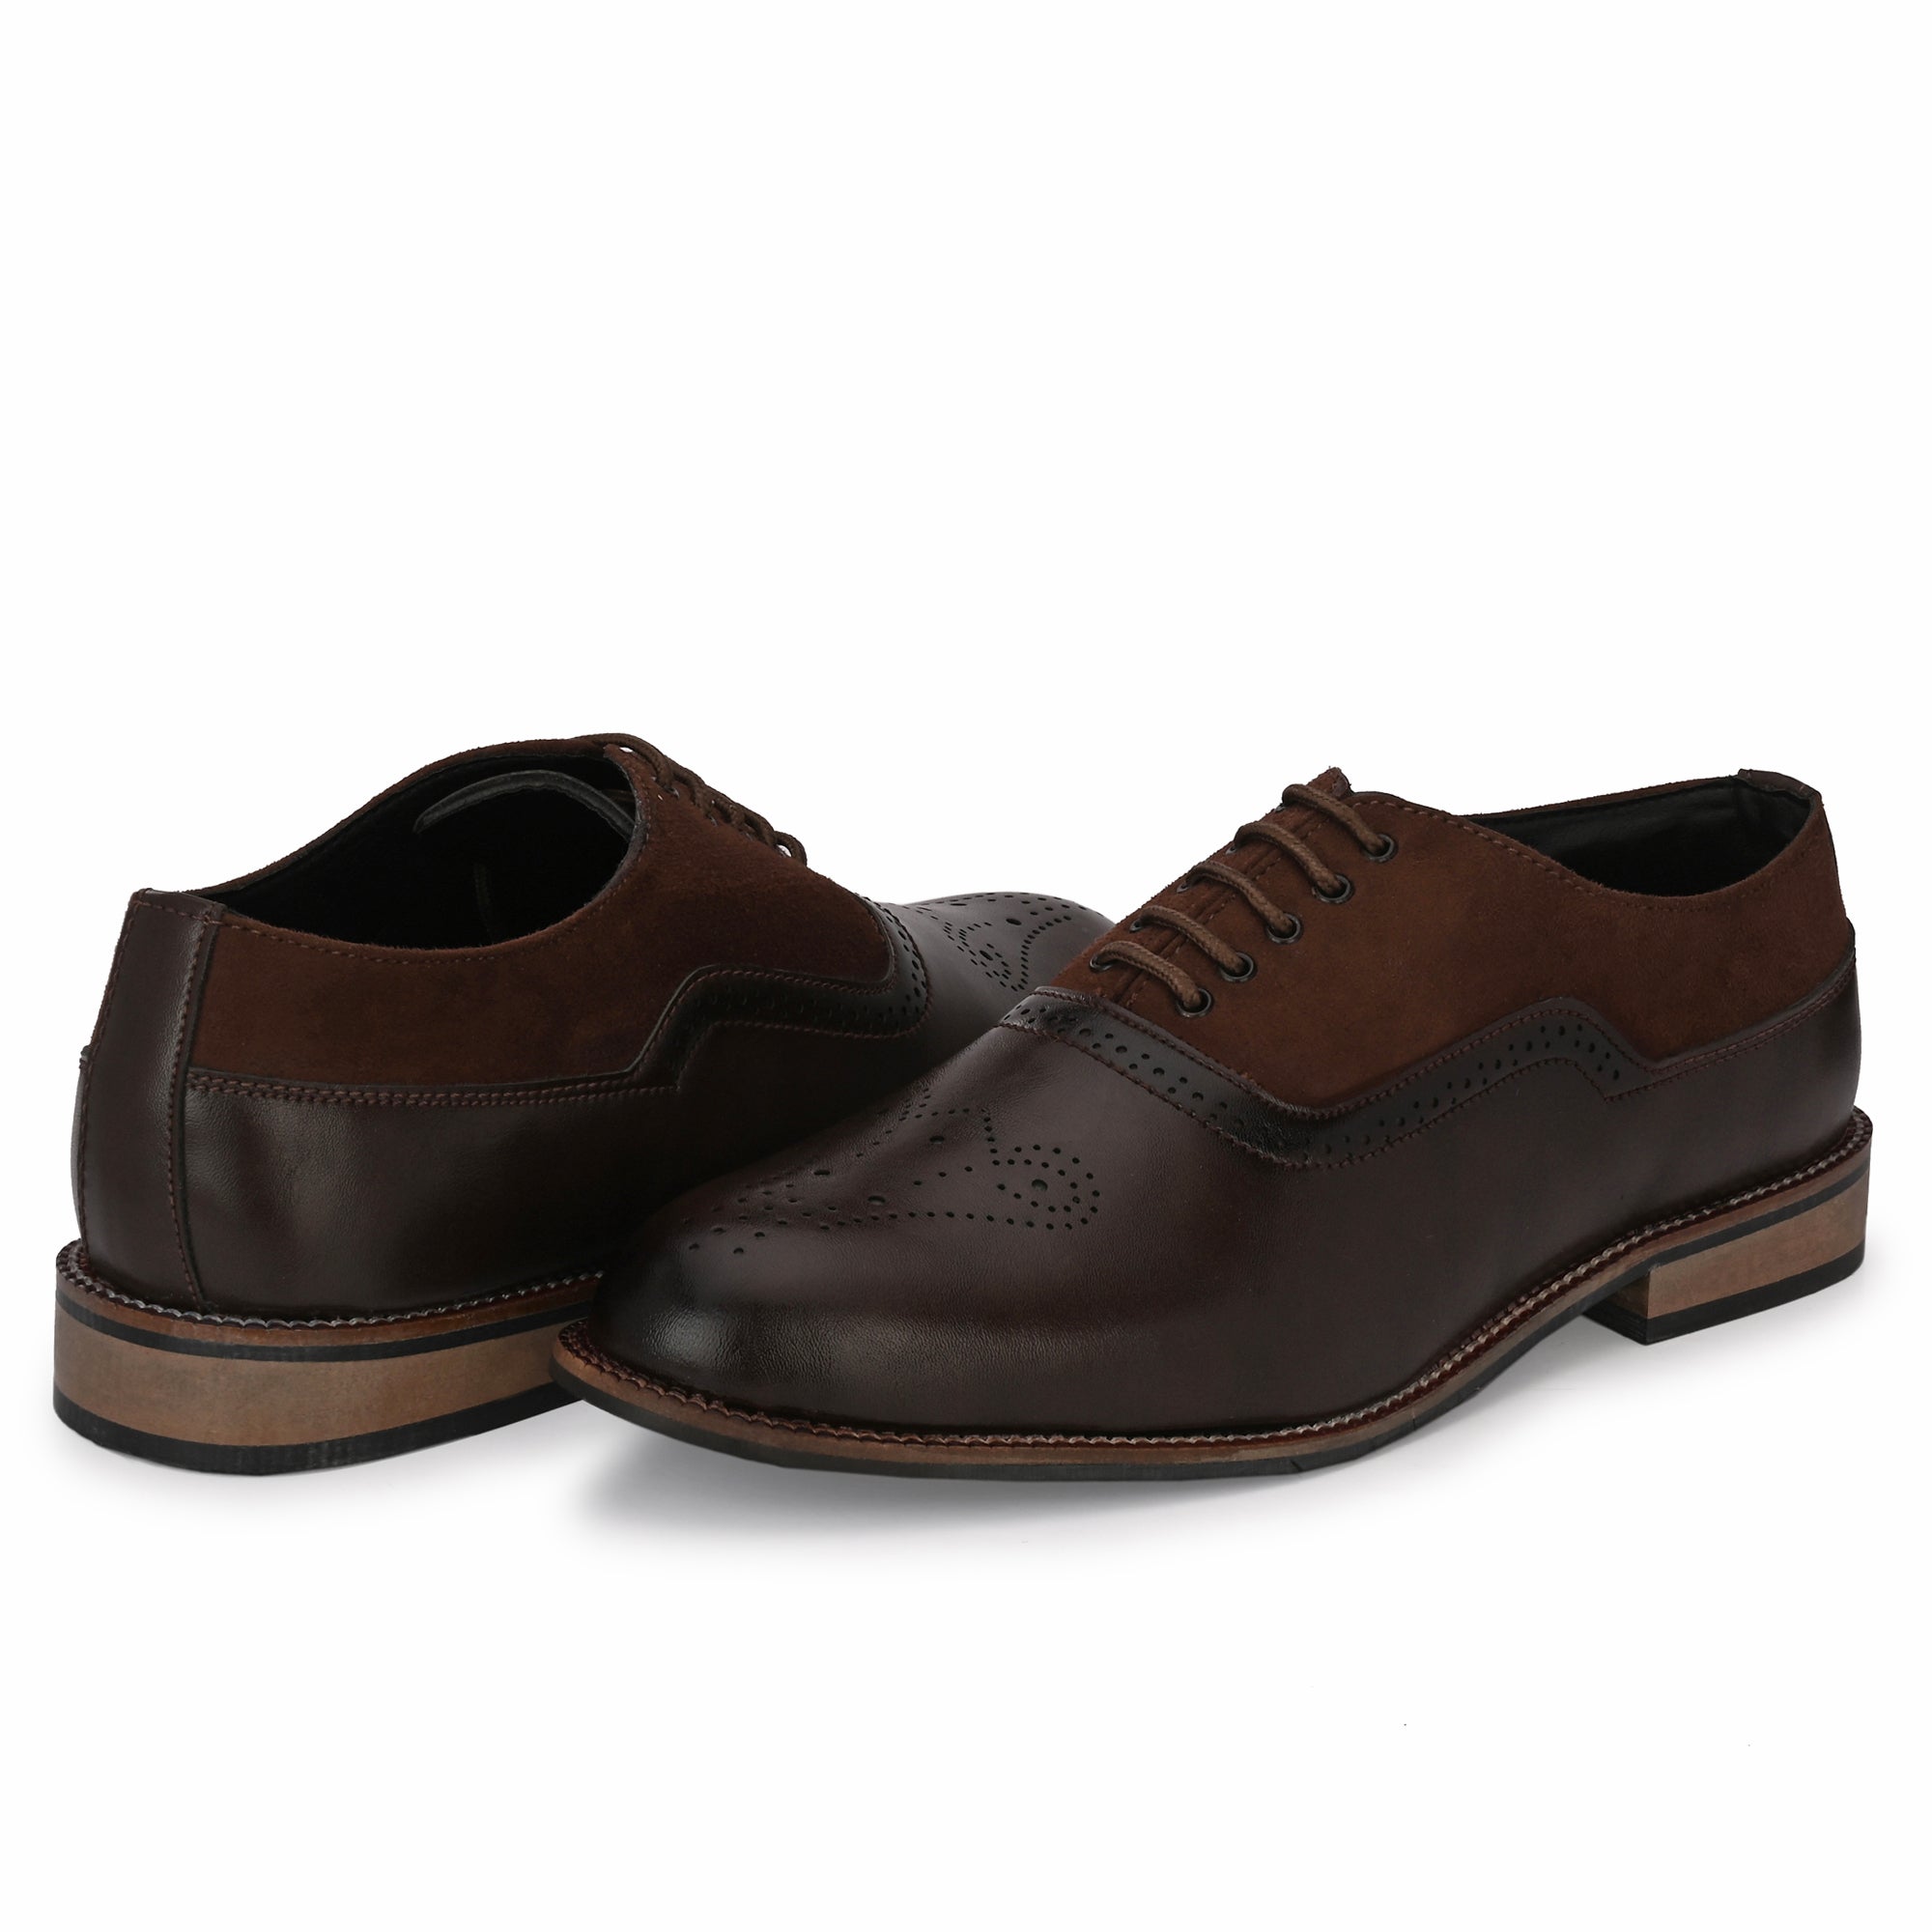 attitudist-brown-double-textured-formal-oxford-shoes-for-men